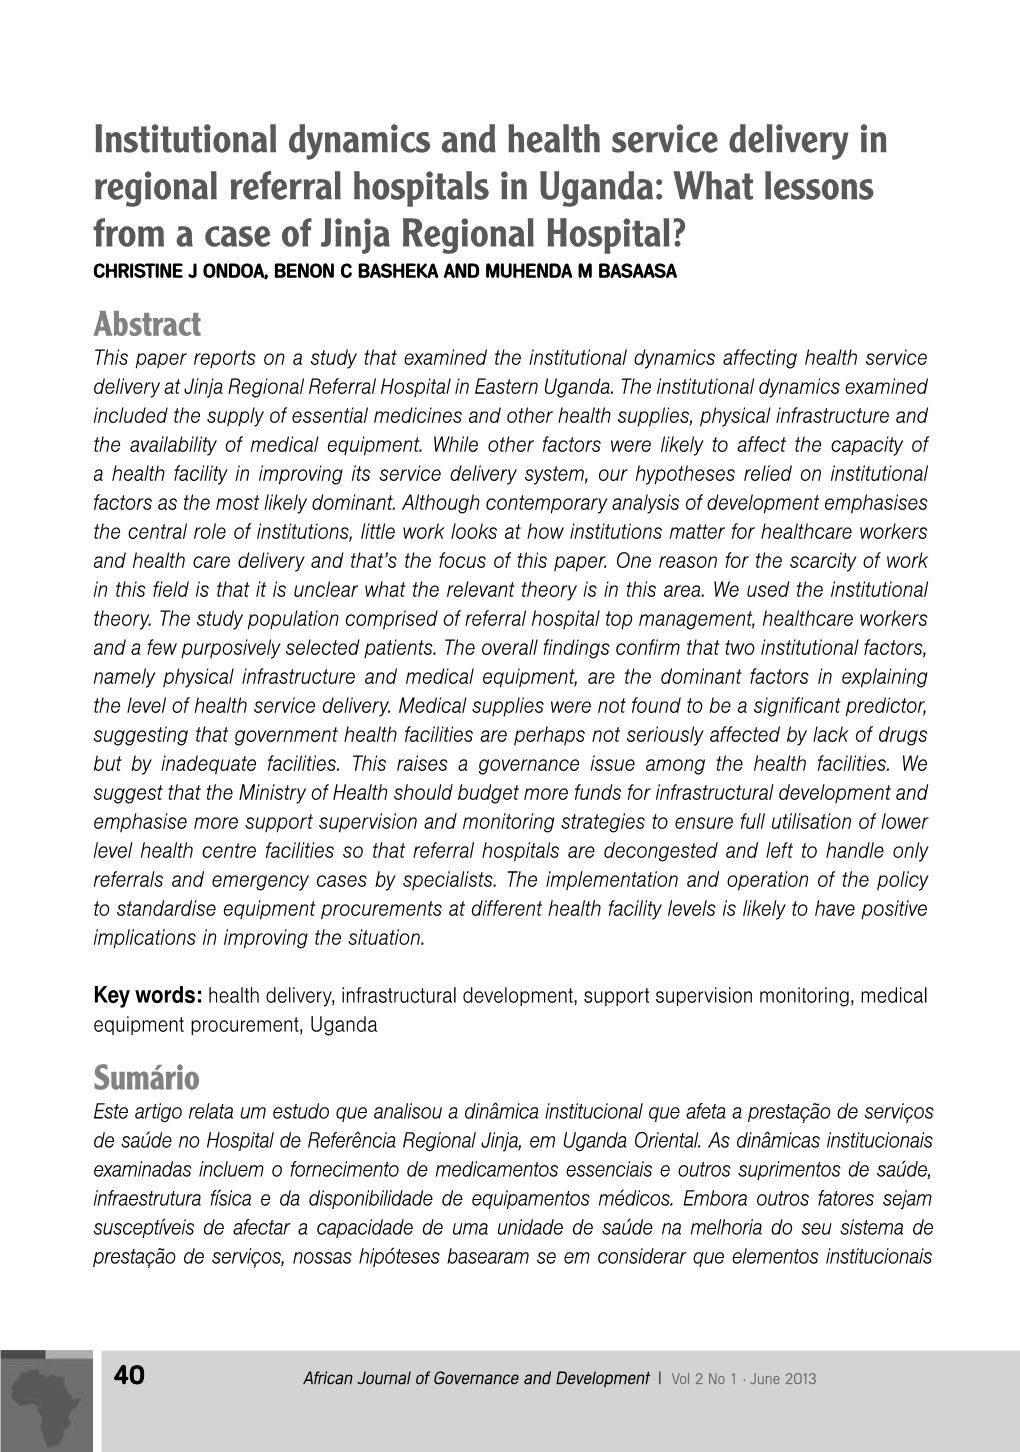 Institutional Dynamics and Health Service Delivery in Regional Referral